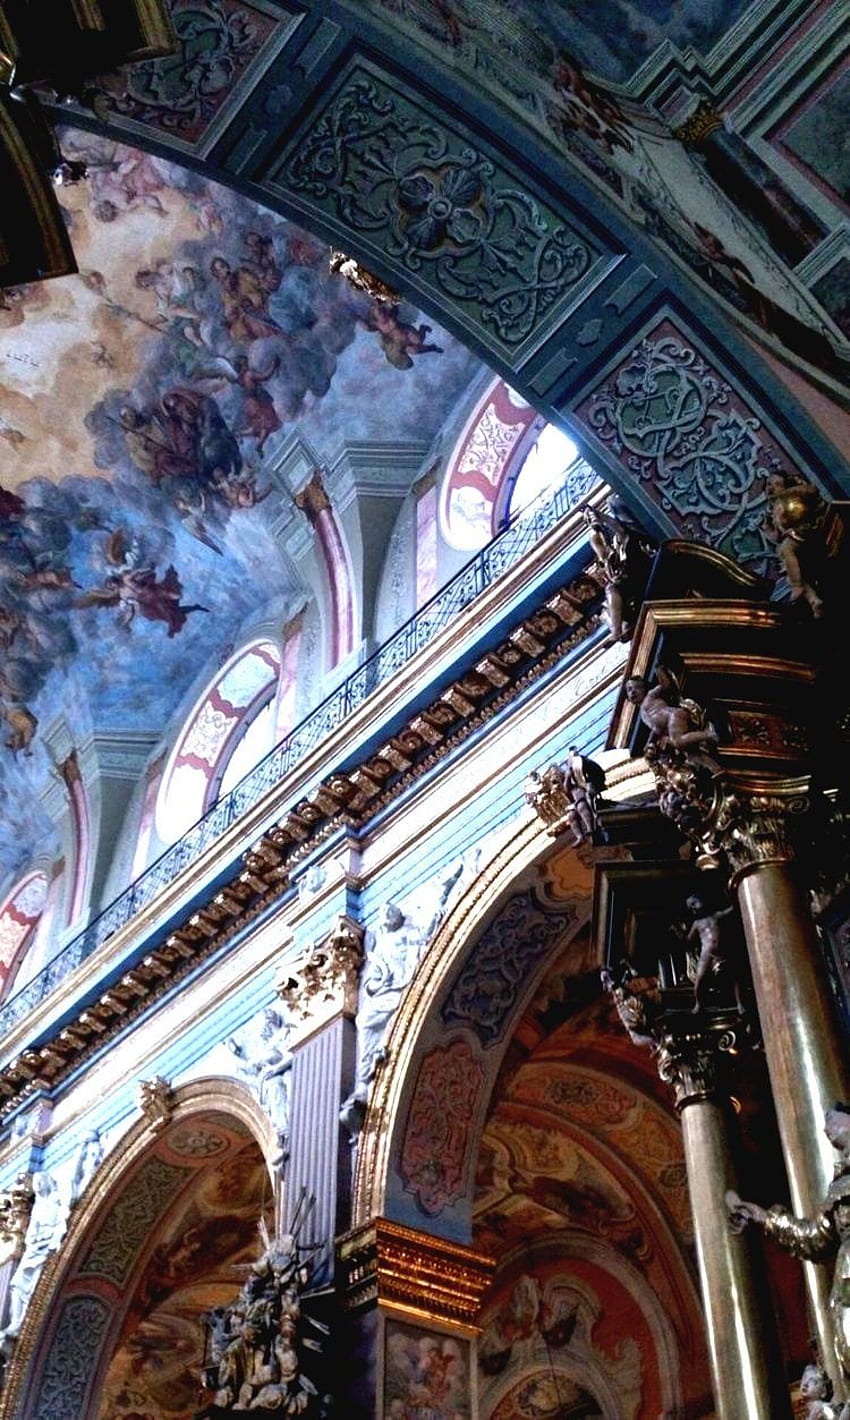 A church with a painted ceiling and columns. - Architecture